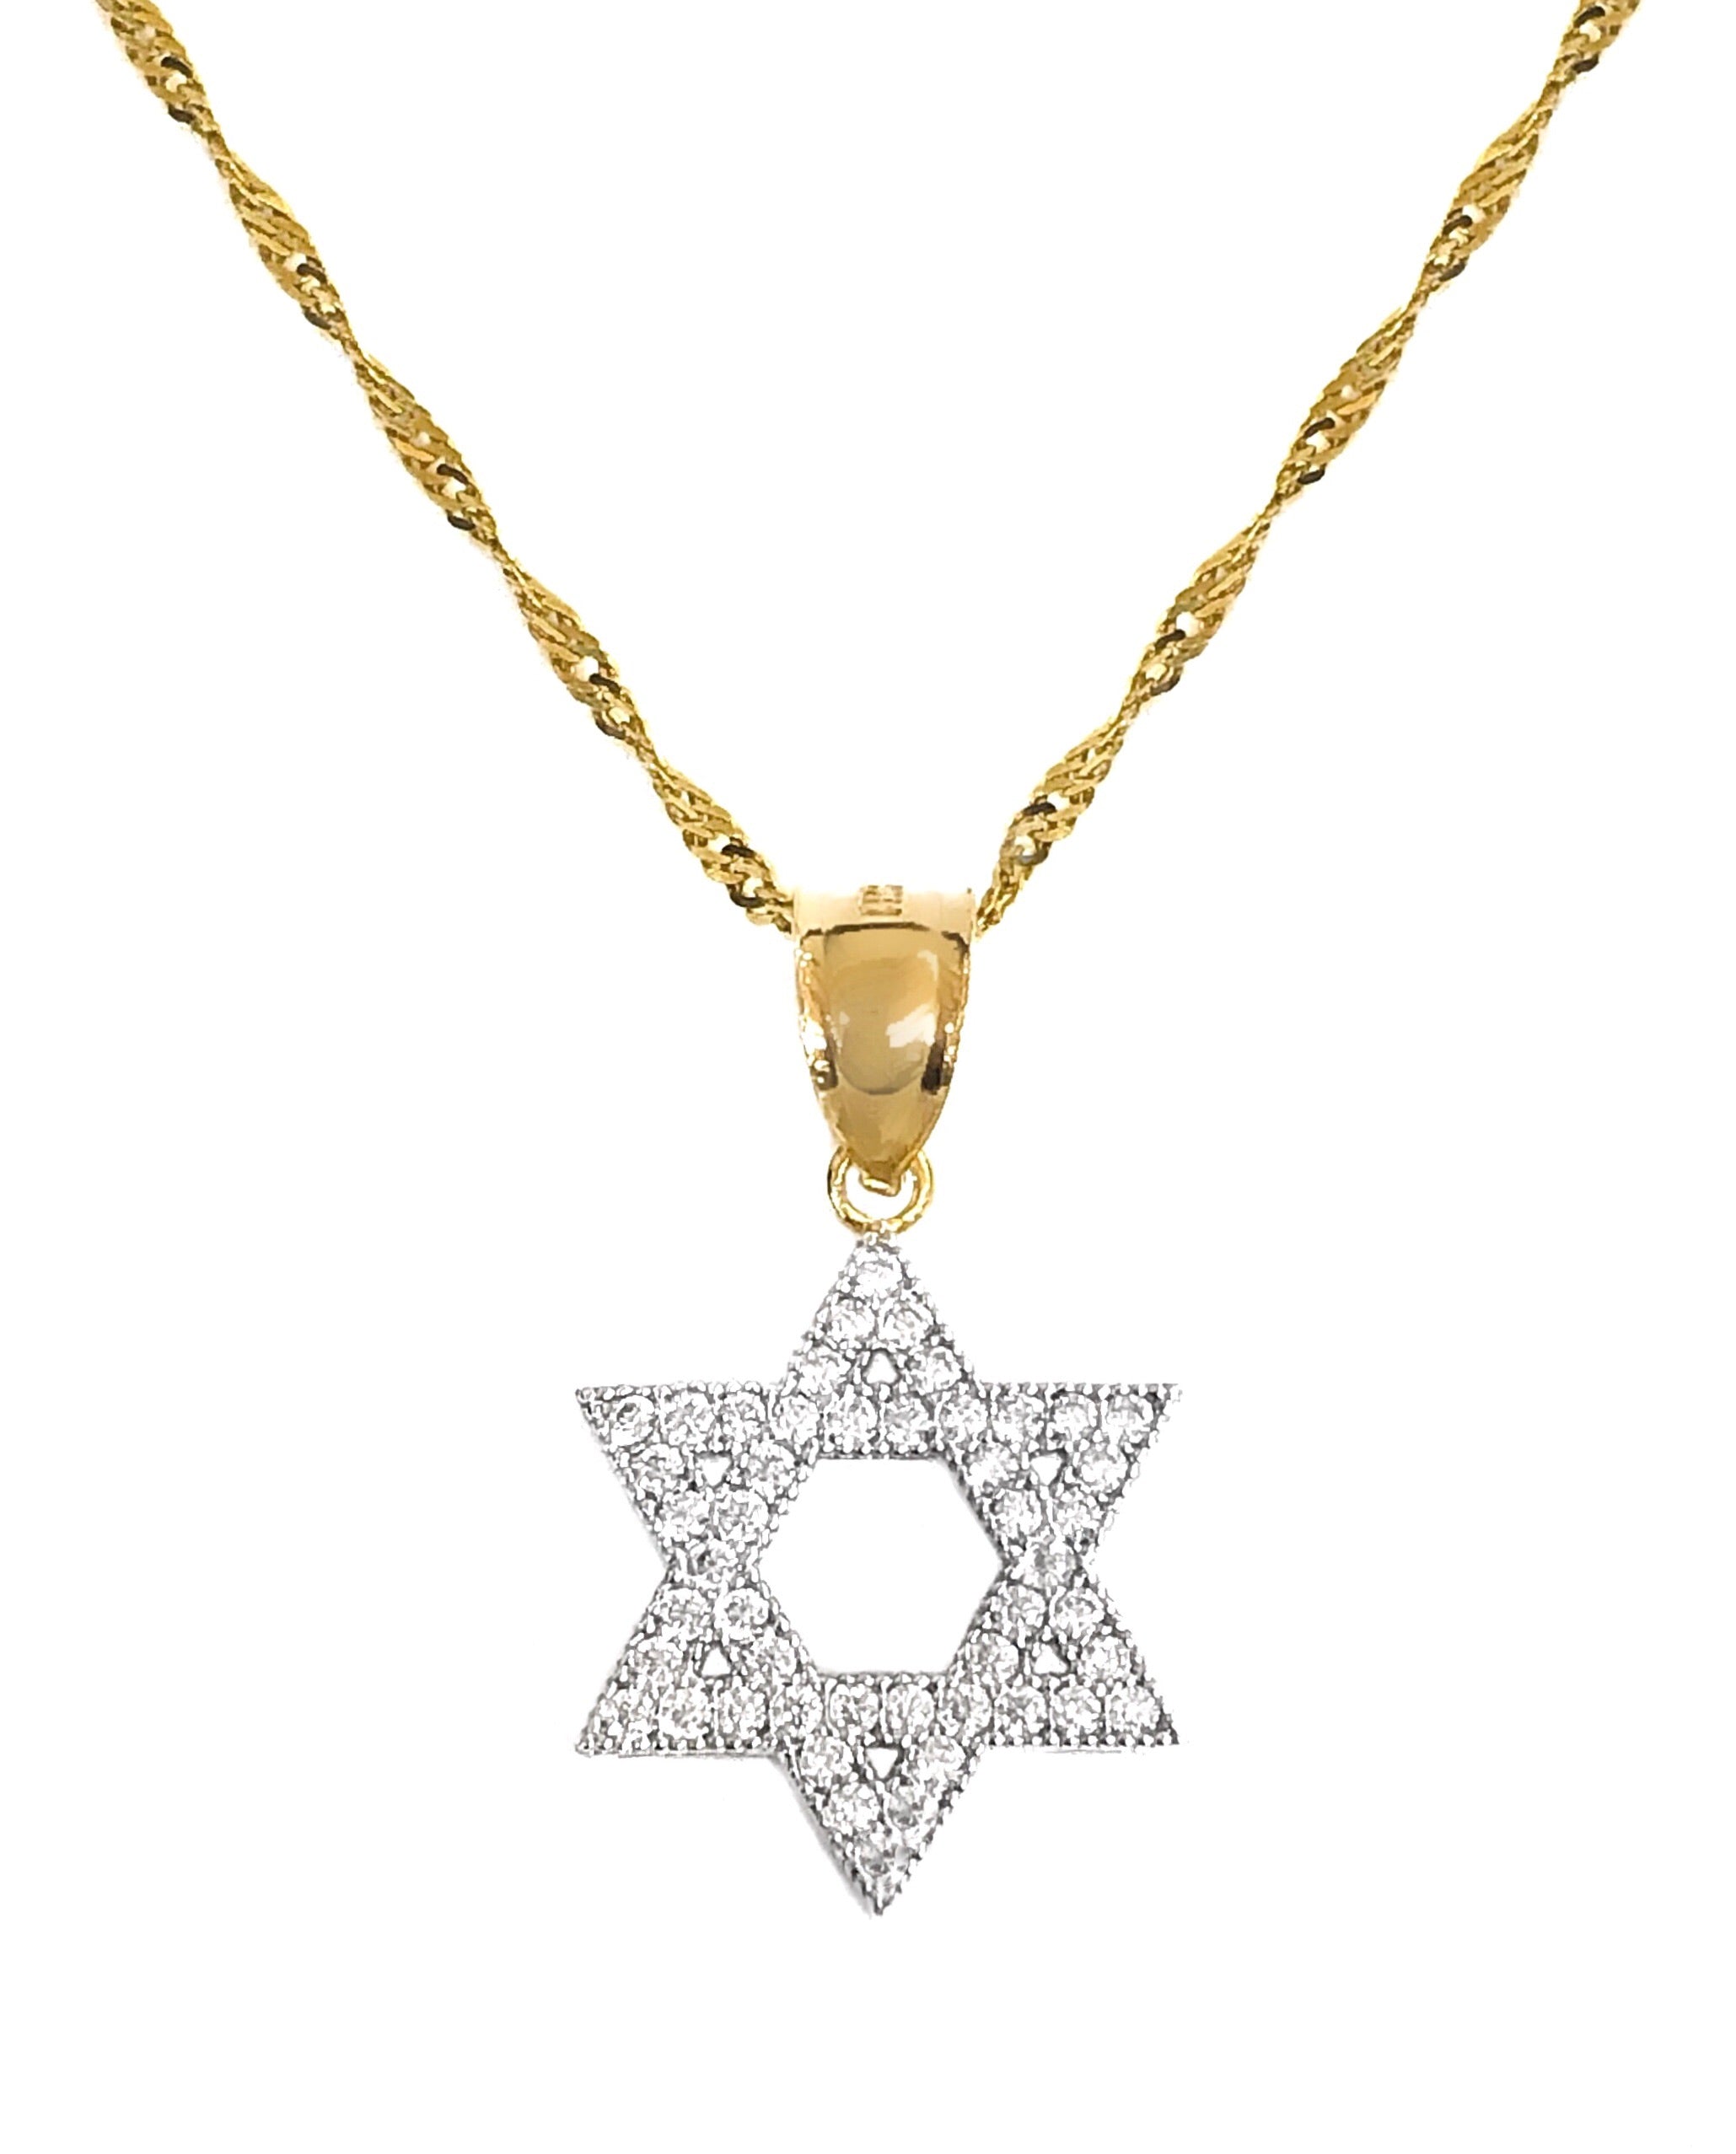 14K YELLOW GOLD PAVE STAR OF DAVID NECKLACE